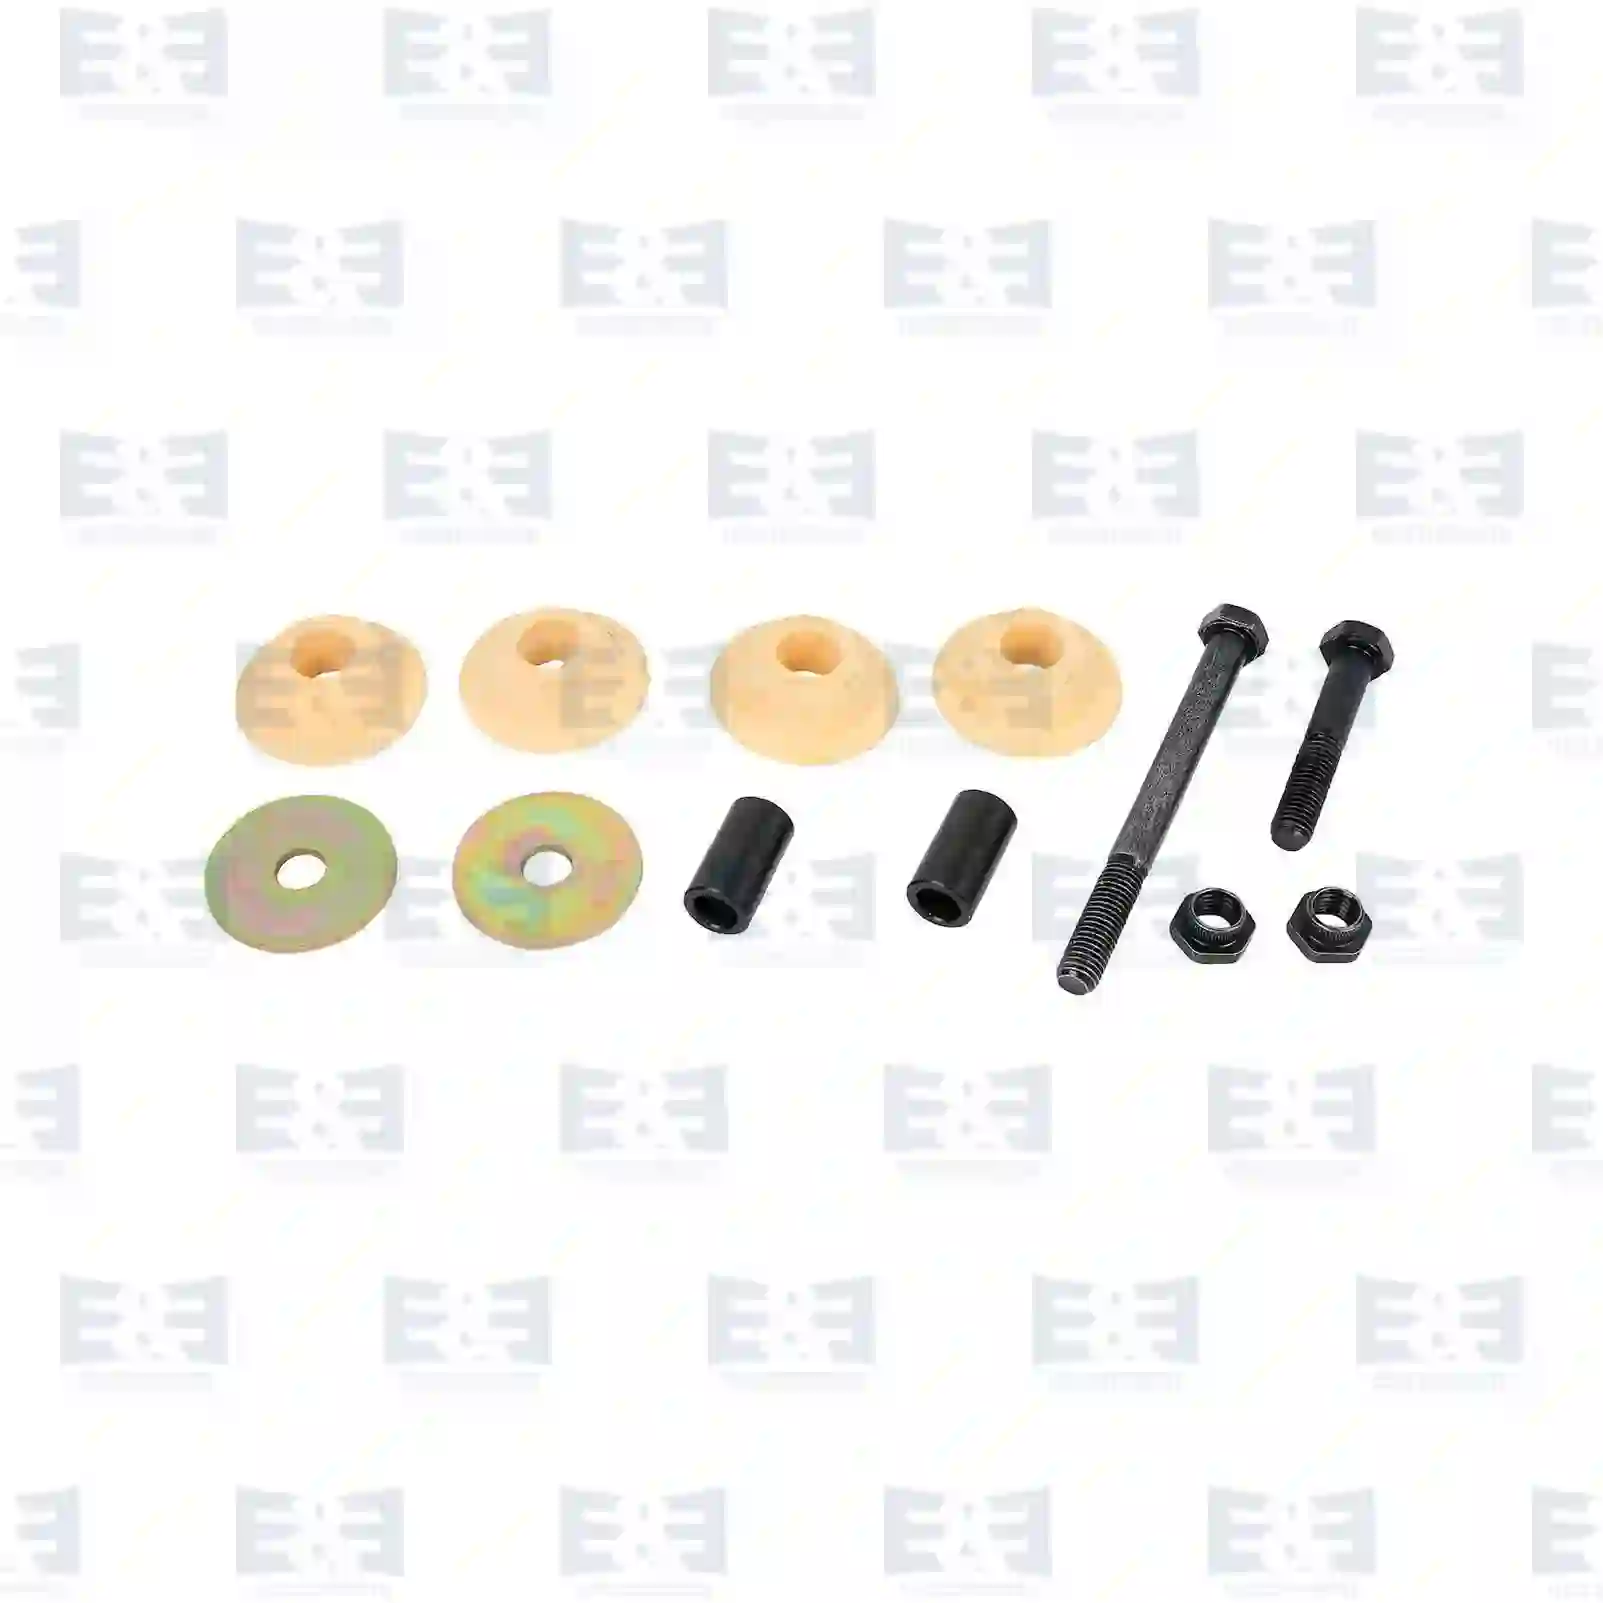  Mounting kit || E&E Truck Spare Parts | Truck Spare Parts, Auotomotive Spare Parts